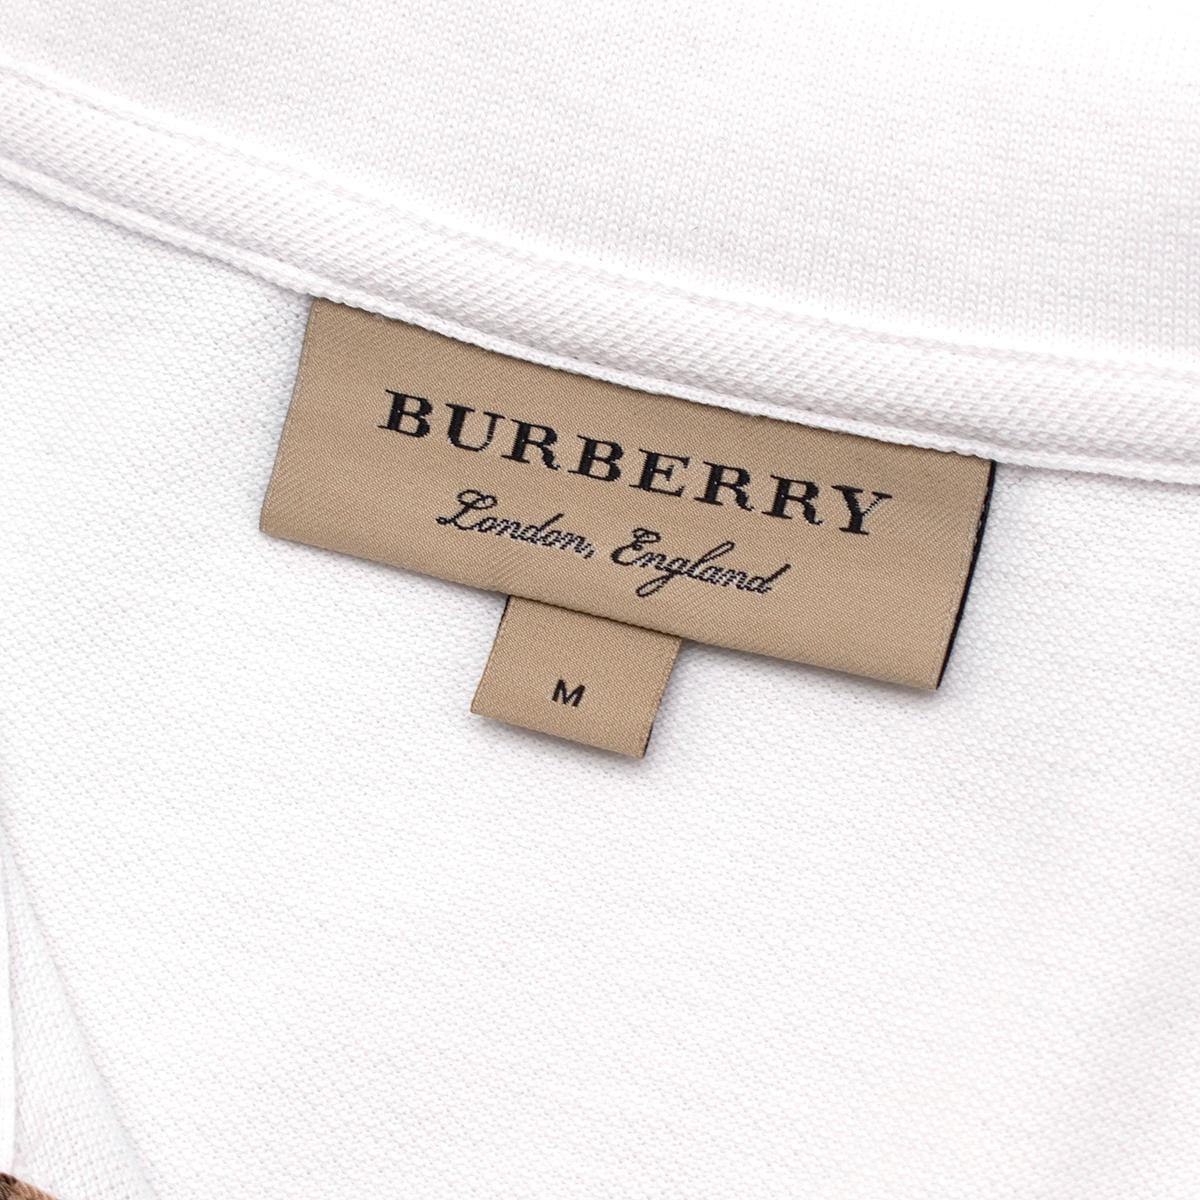 Burberry White Cotton Pique Polo Shirt with Dragon Applique - US M In New Condition For Sale In London, GB